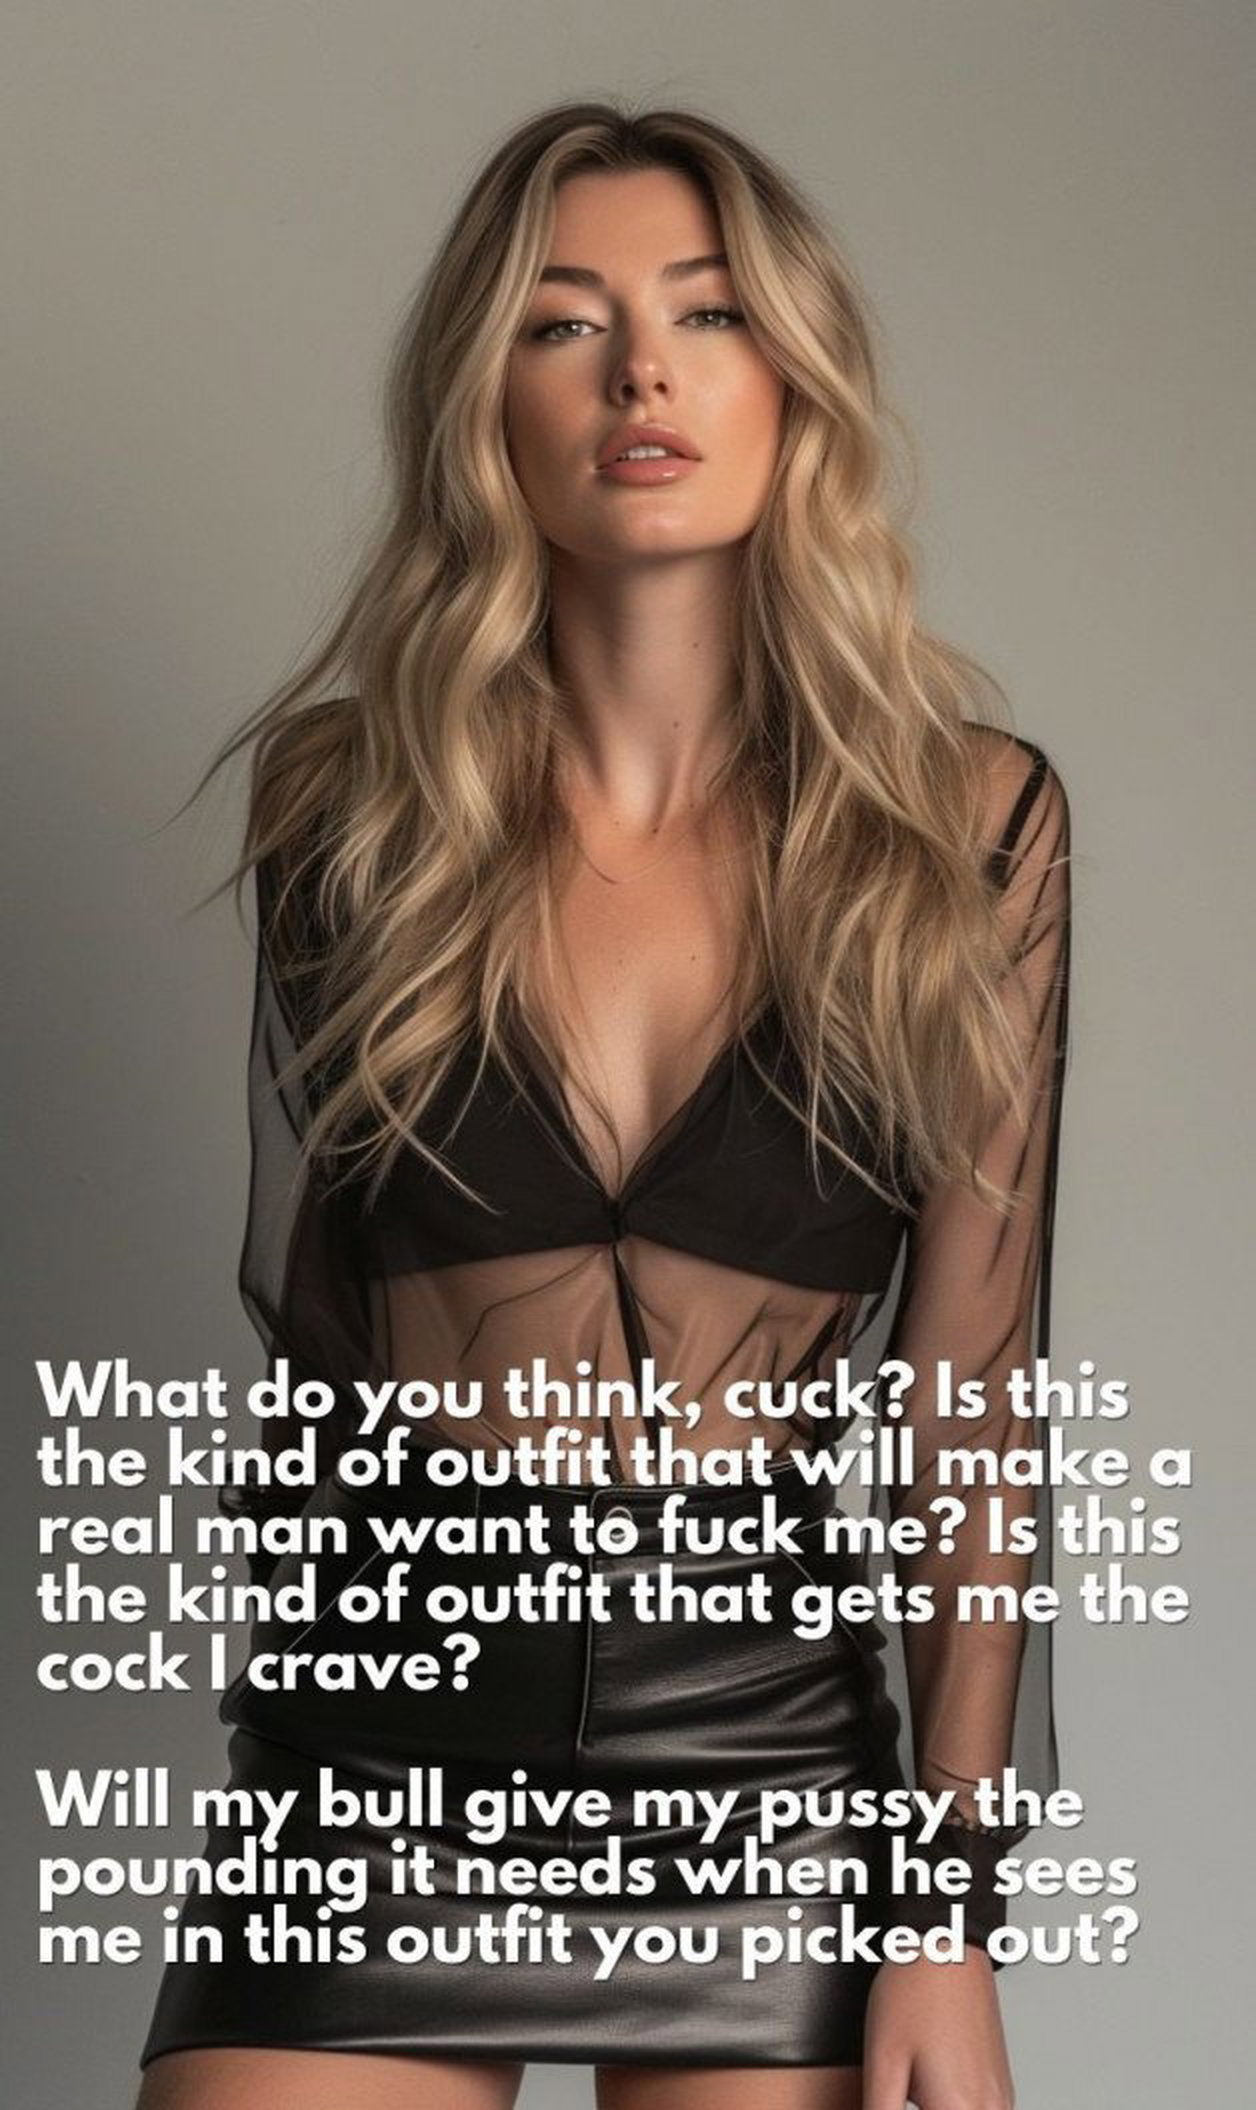 Photo by beccabellamy with the username @beccabellamy,  January 30, 2024 at 9:18 PM. The post is about the topic Cuckold Captions and the text says 'A short leather skirt. A sheer blouse. A lovely black bra.

Yes, that outfit will make her bull want her. It might ensure that they don't even go on their date as he might could find himself compelled to tear her clothes off and have his way with her..'